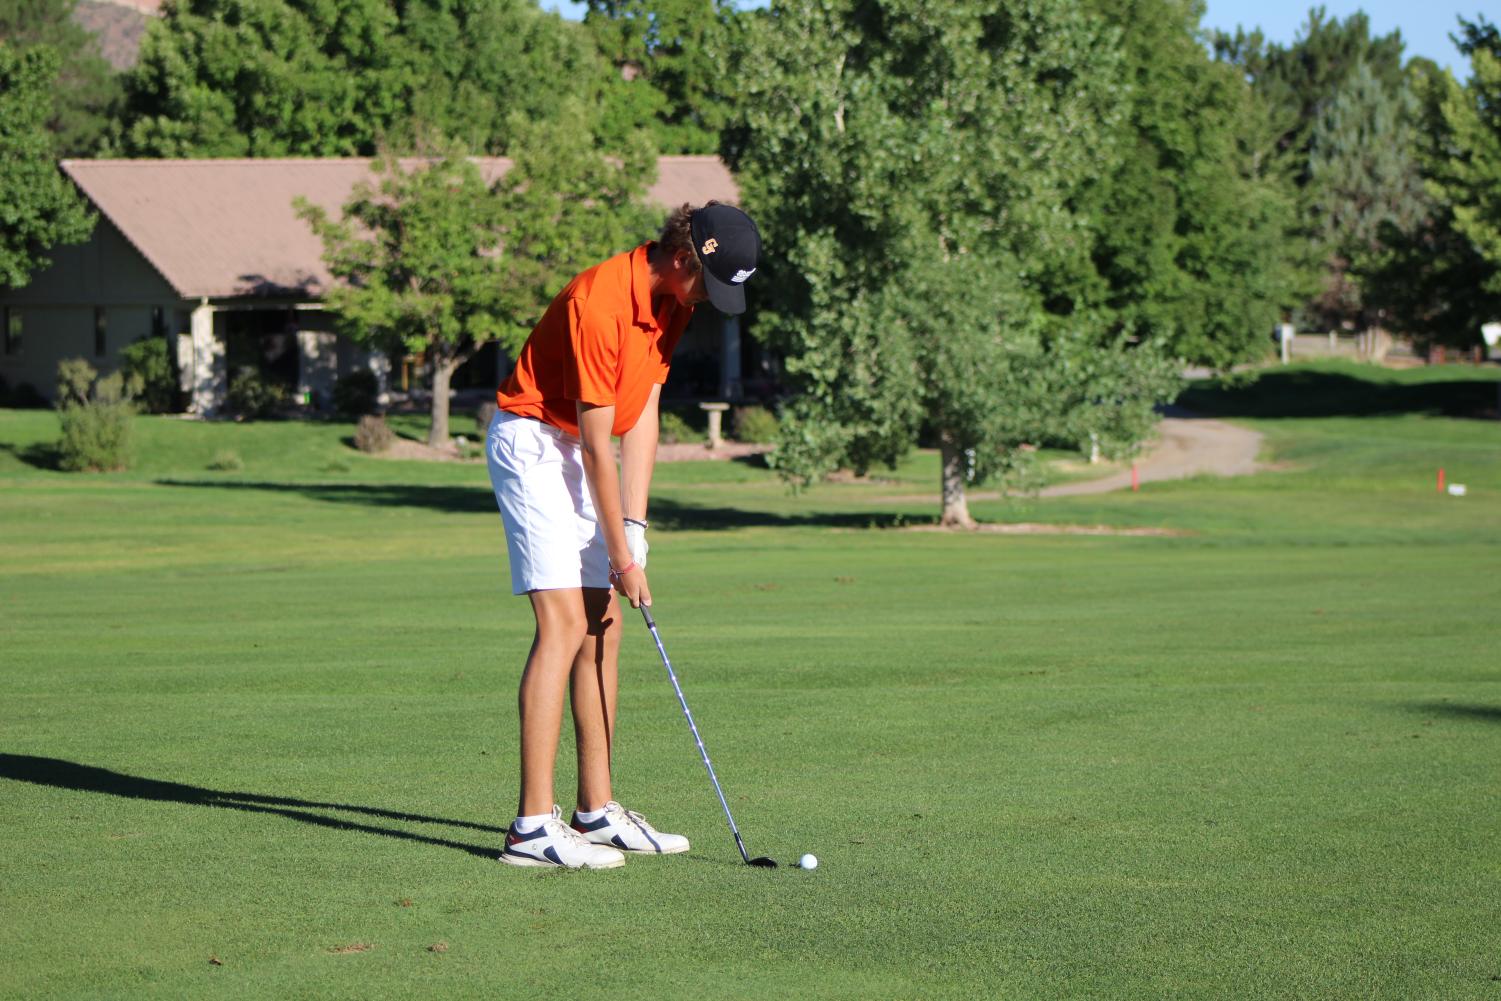 GJHS sophomore Jack Kaul lines up a putt during a tournament this season. The Tigers qualified for state for the first time in five years and finished 10th in Class 4A.